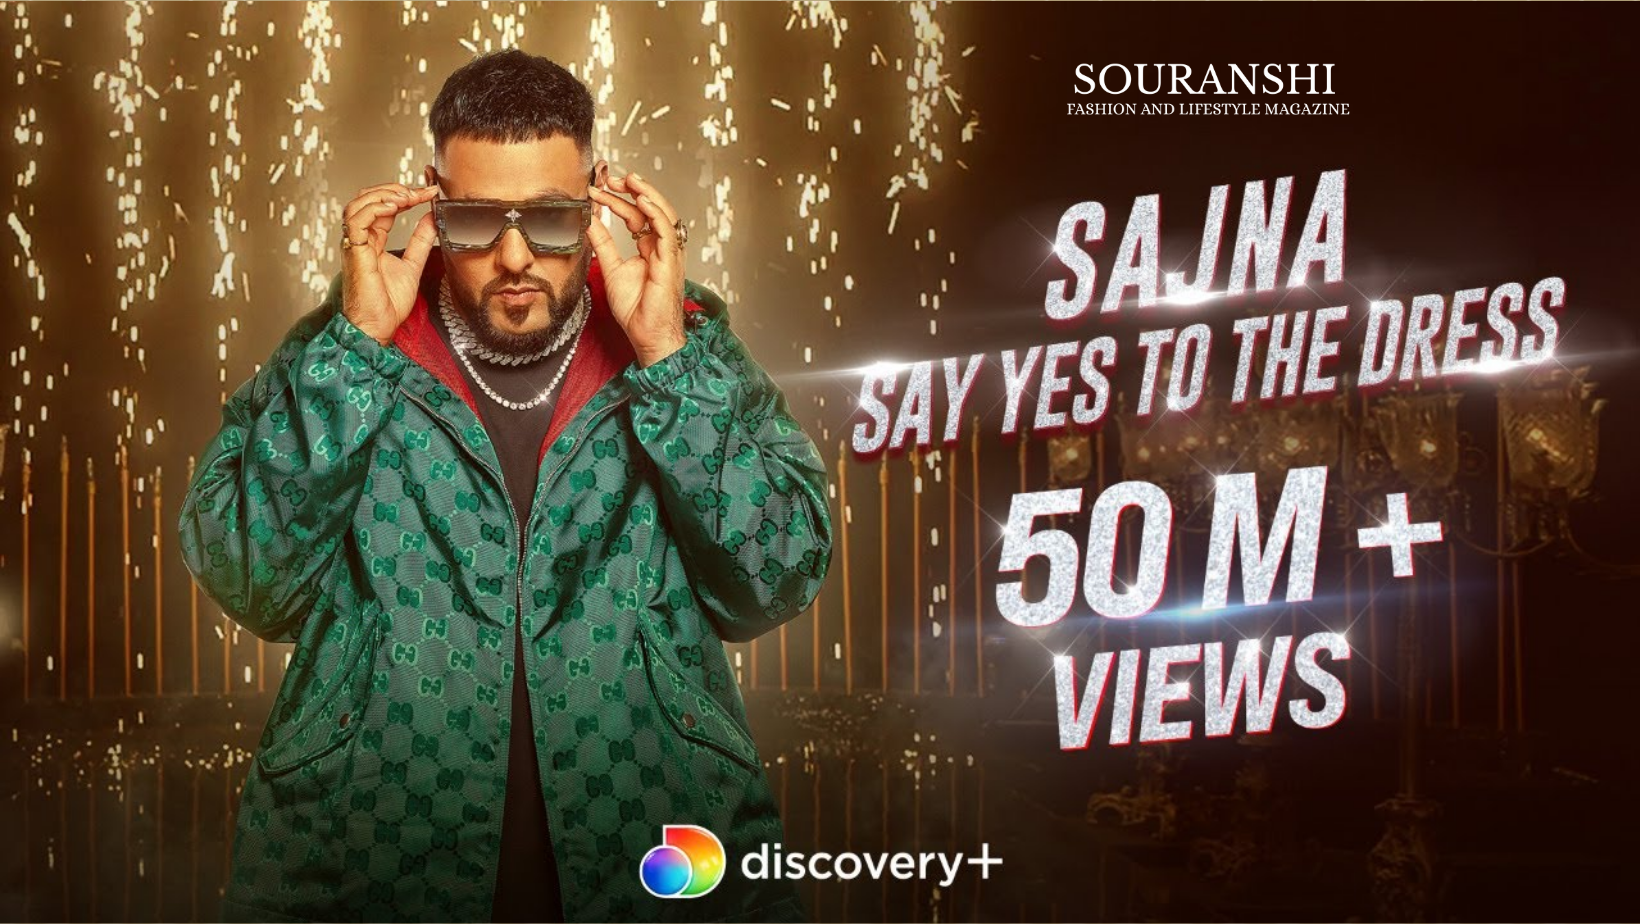 Discovery+ has launched the trailer of ‘Say Yes to The Dress’ India.